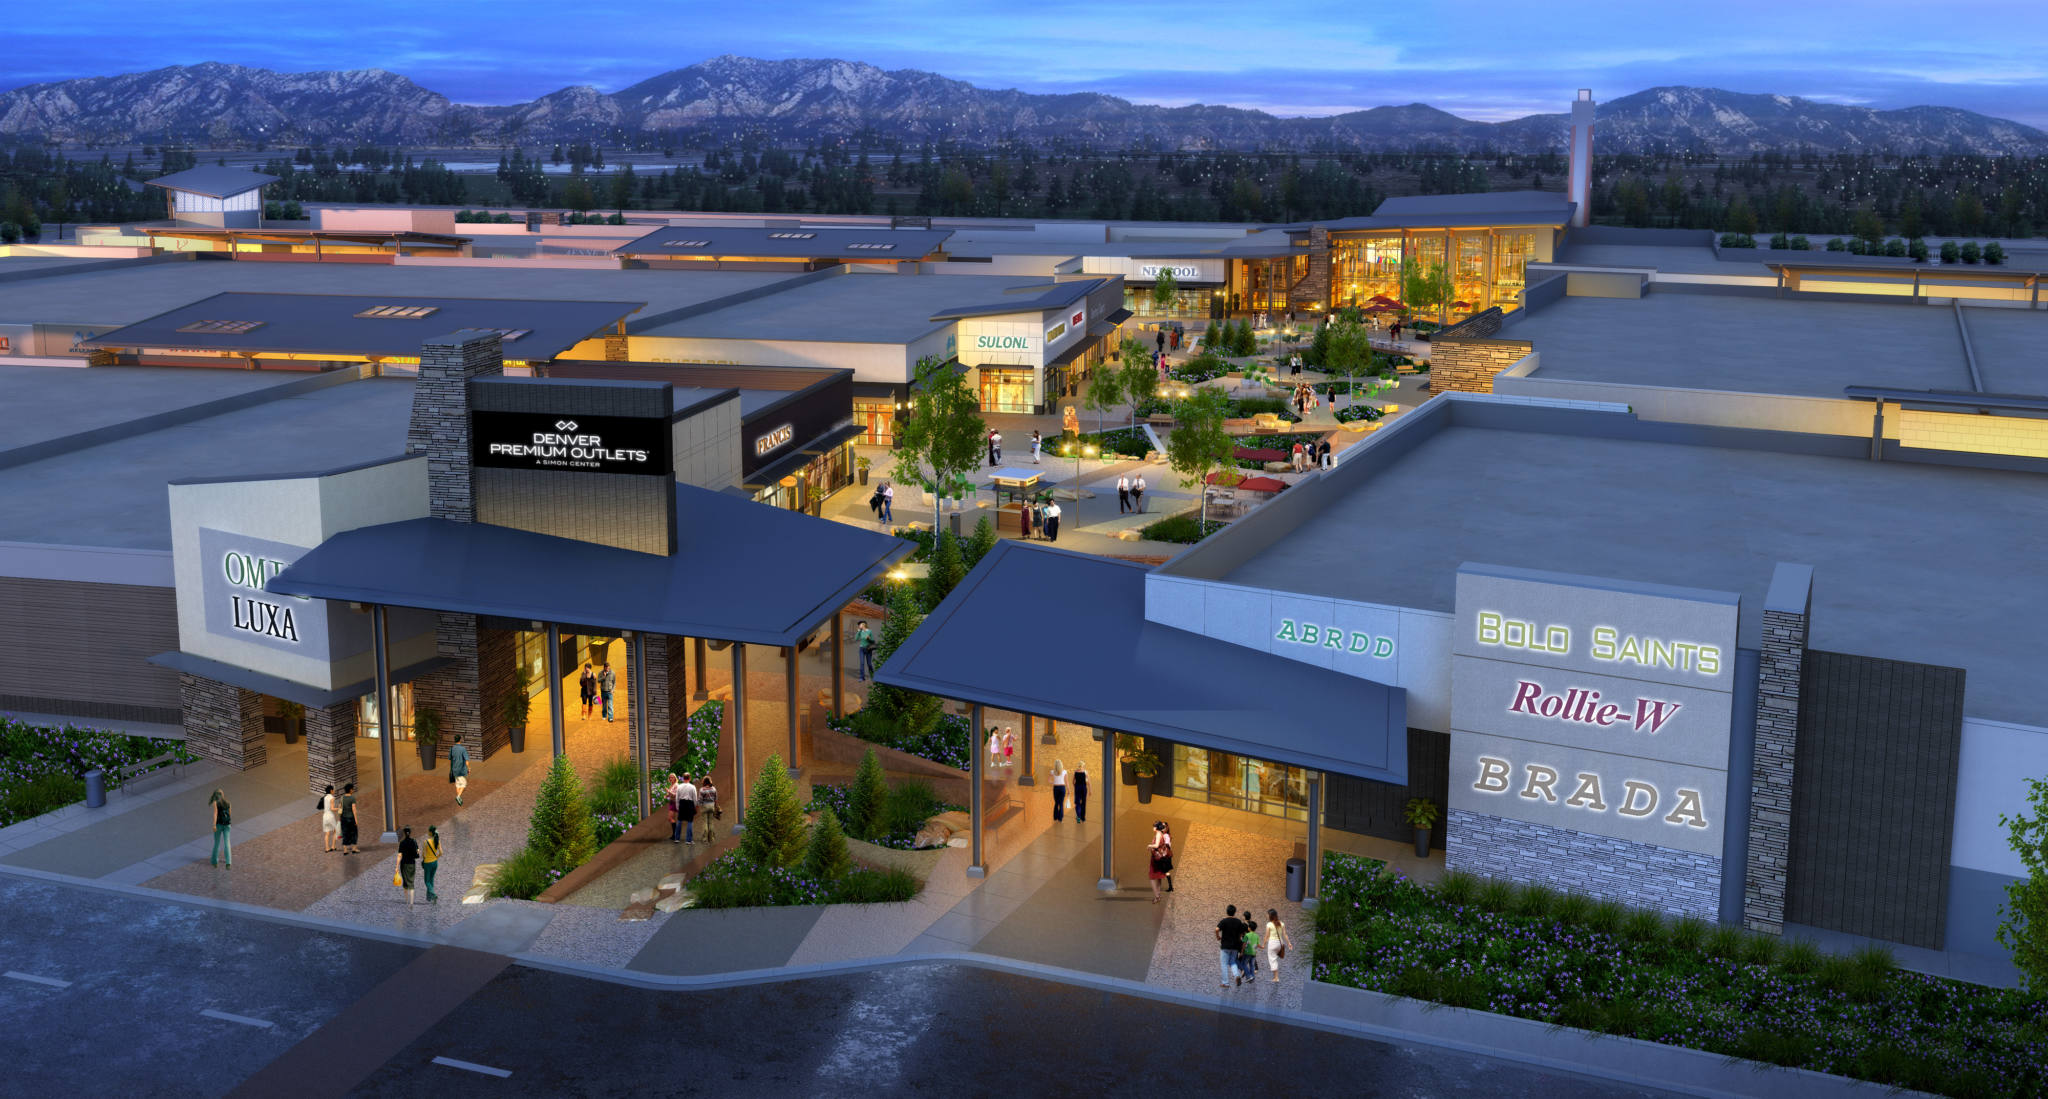 Denver Premium Outlets announces Opening date of September 27, 2018 confirms additional of new stores - Thornton, Colorado Economic Development